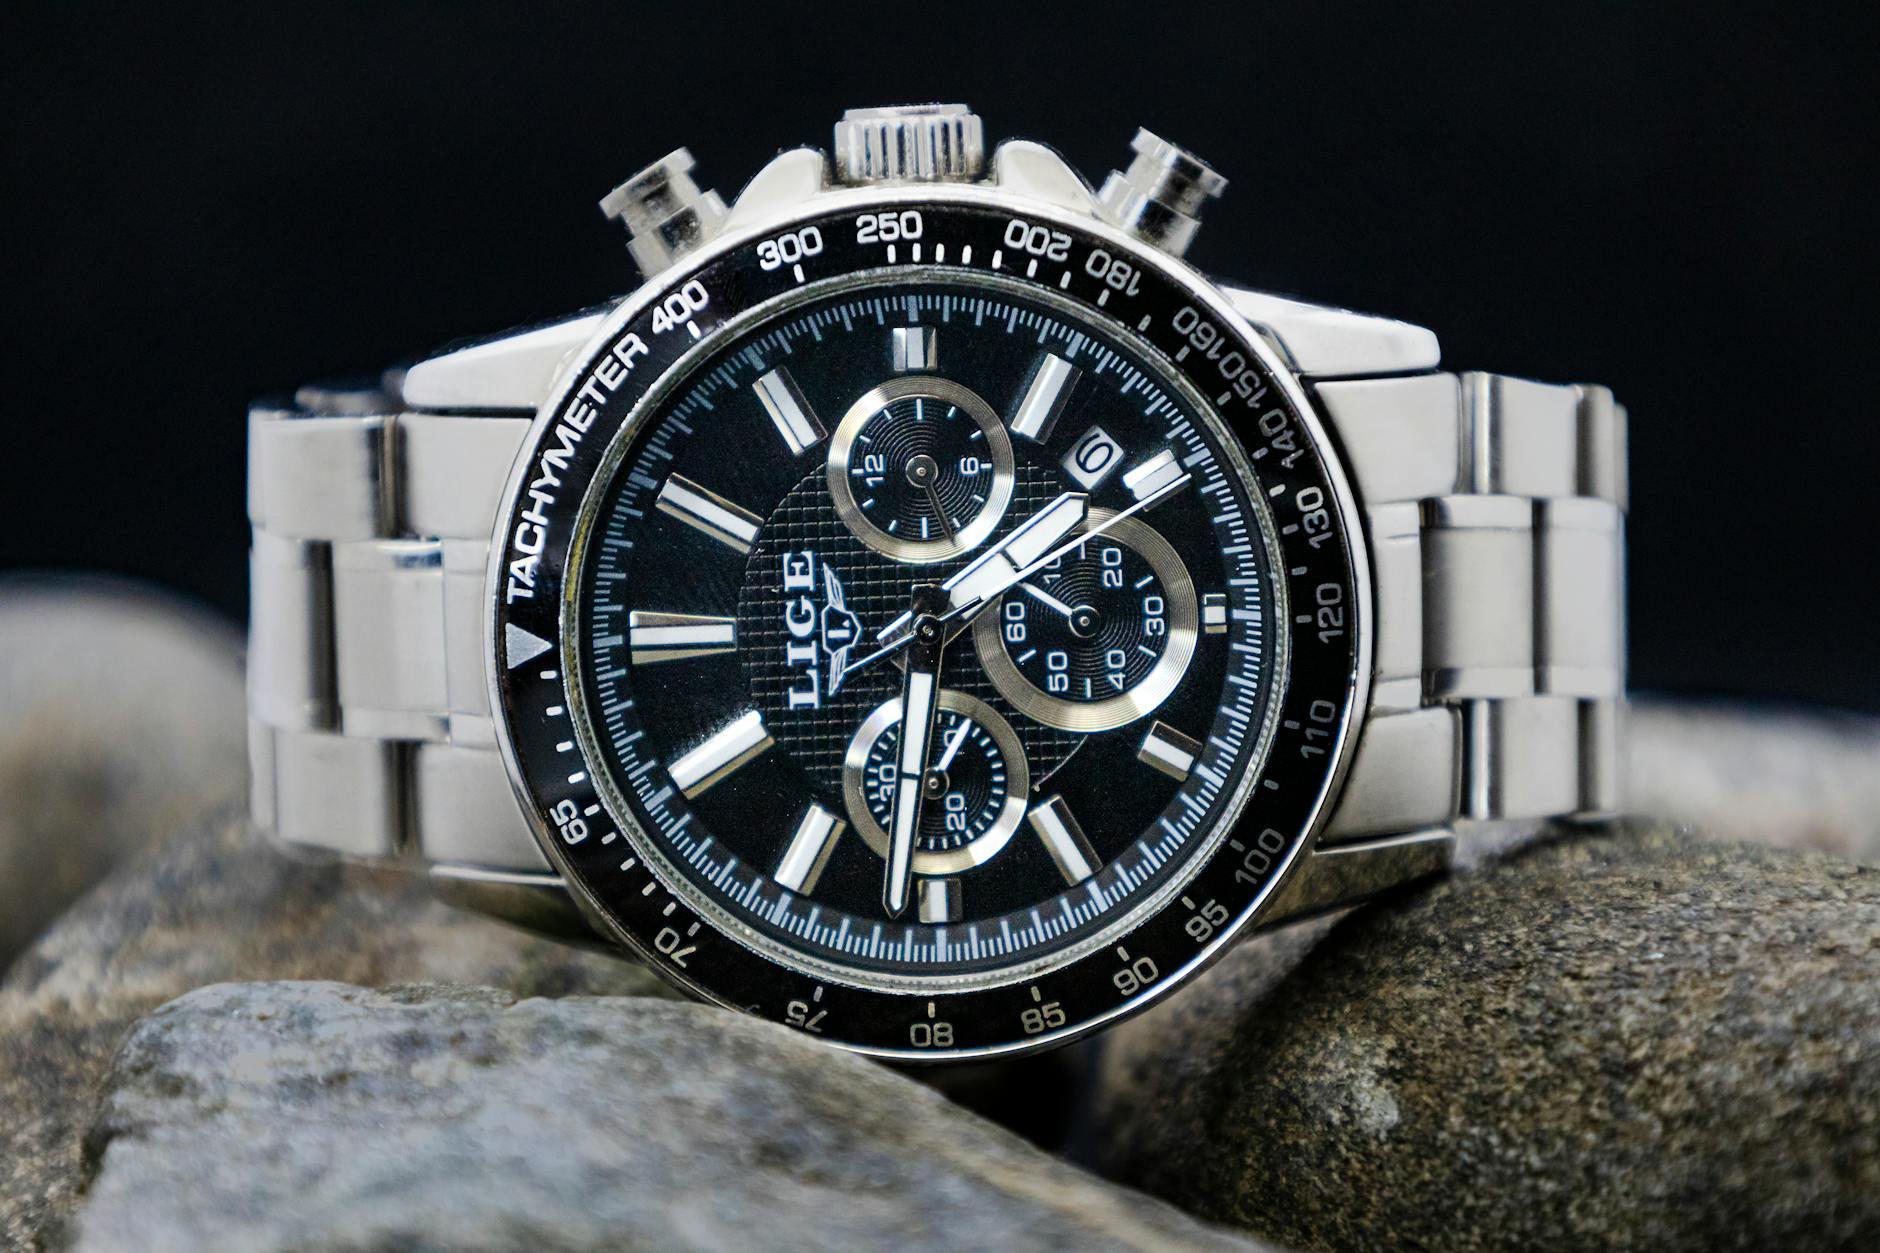 Black and Silver Round Chronograph Watch